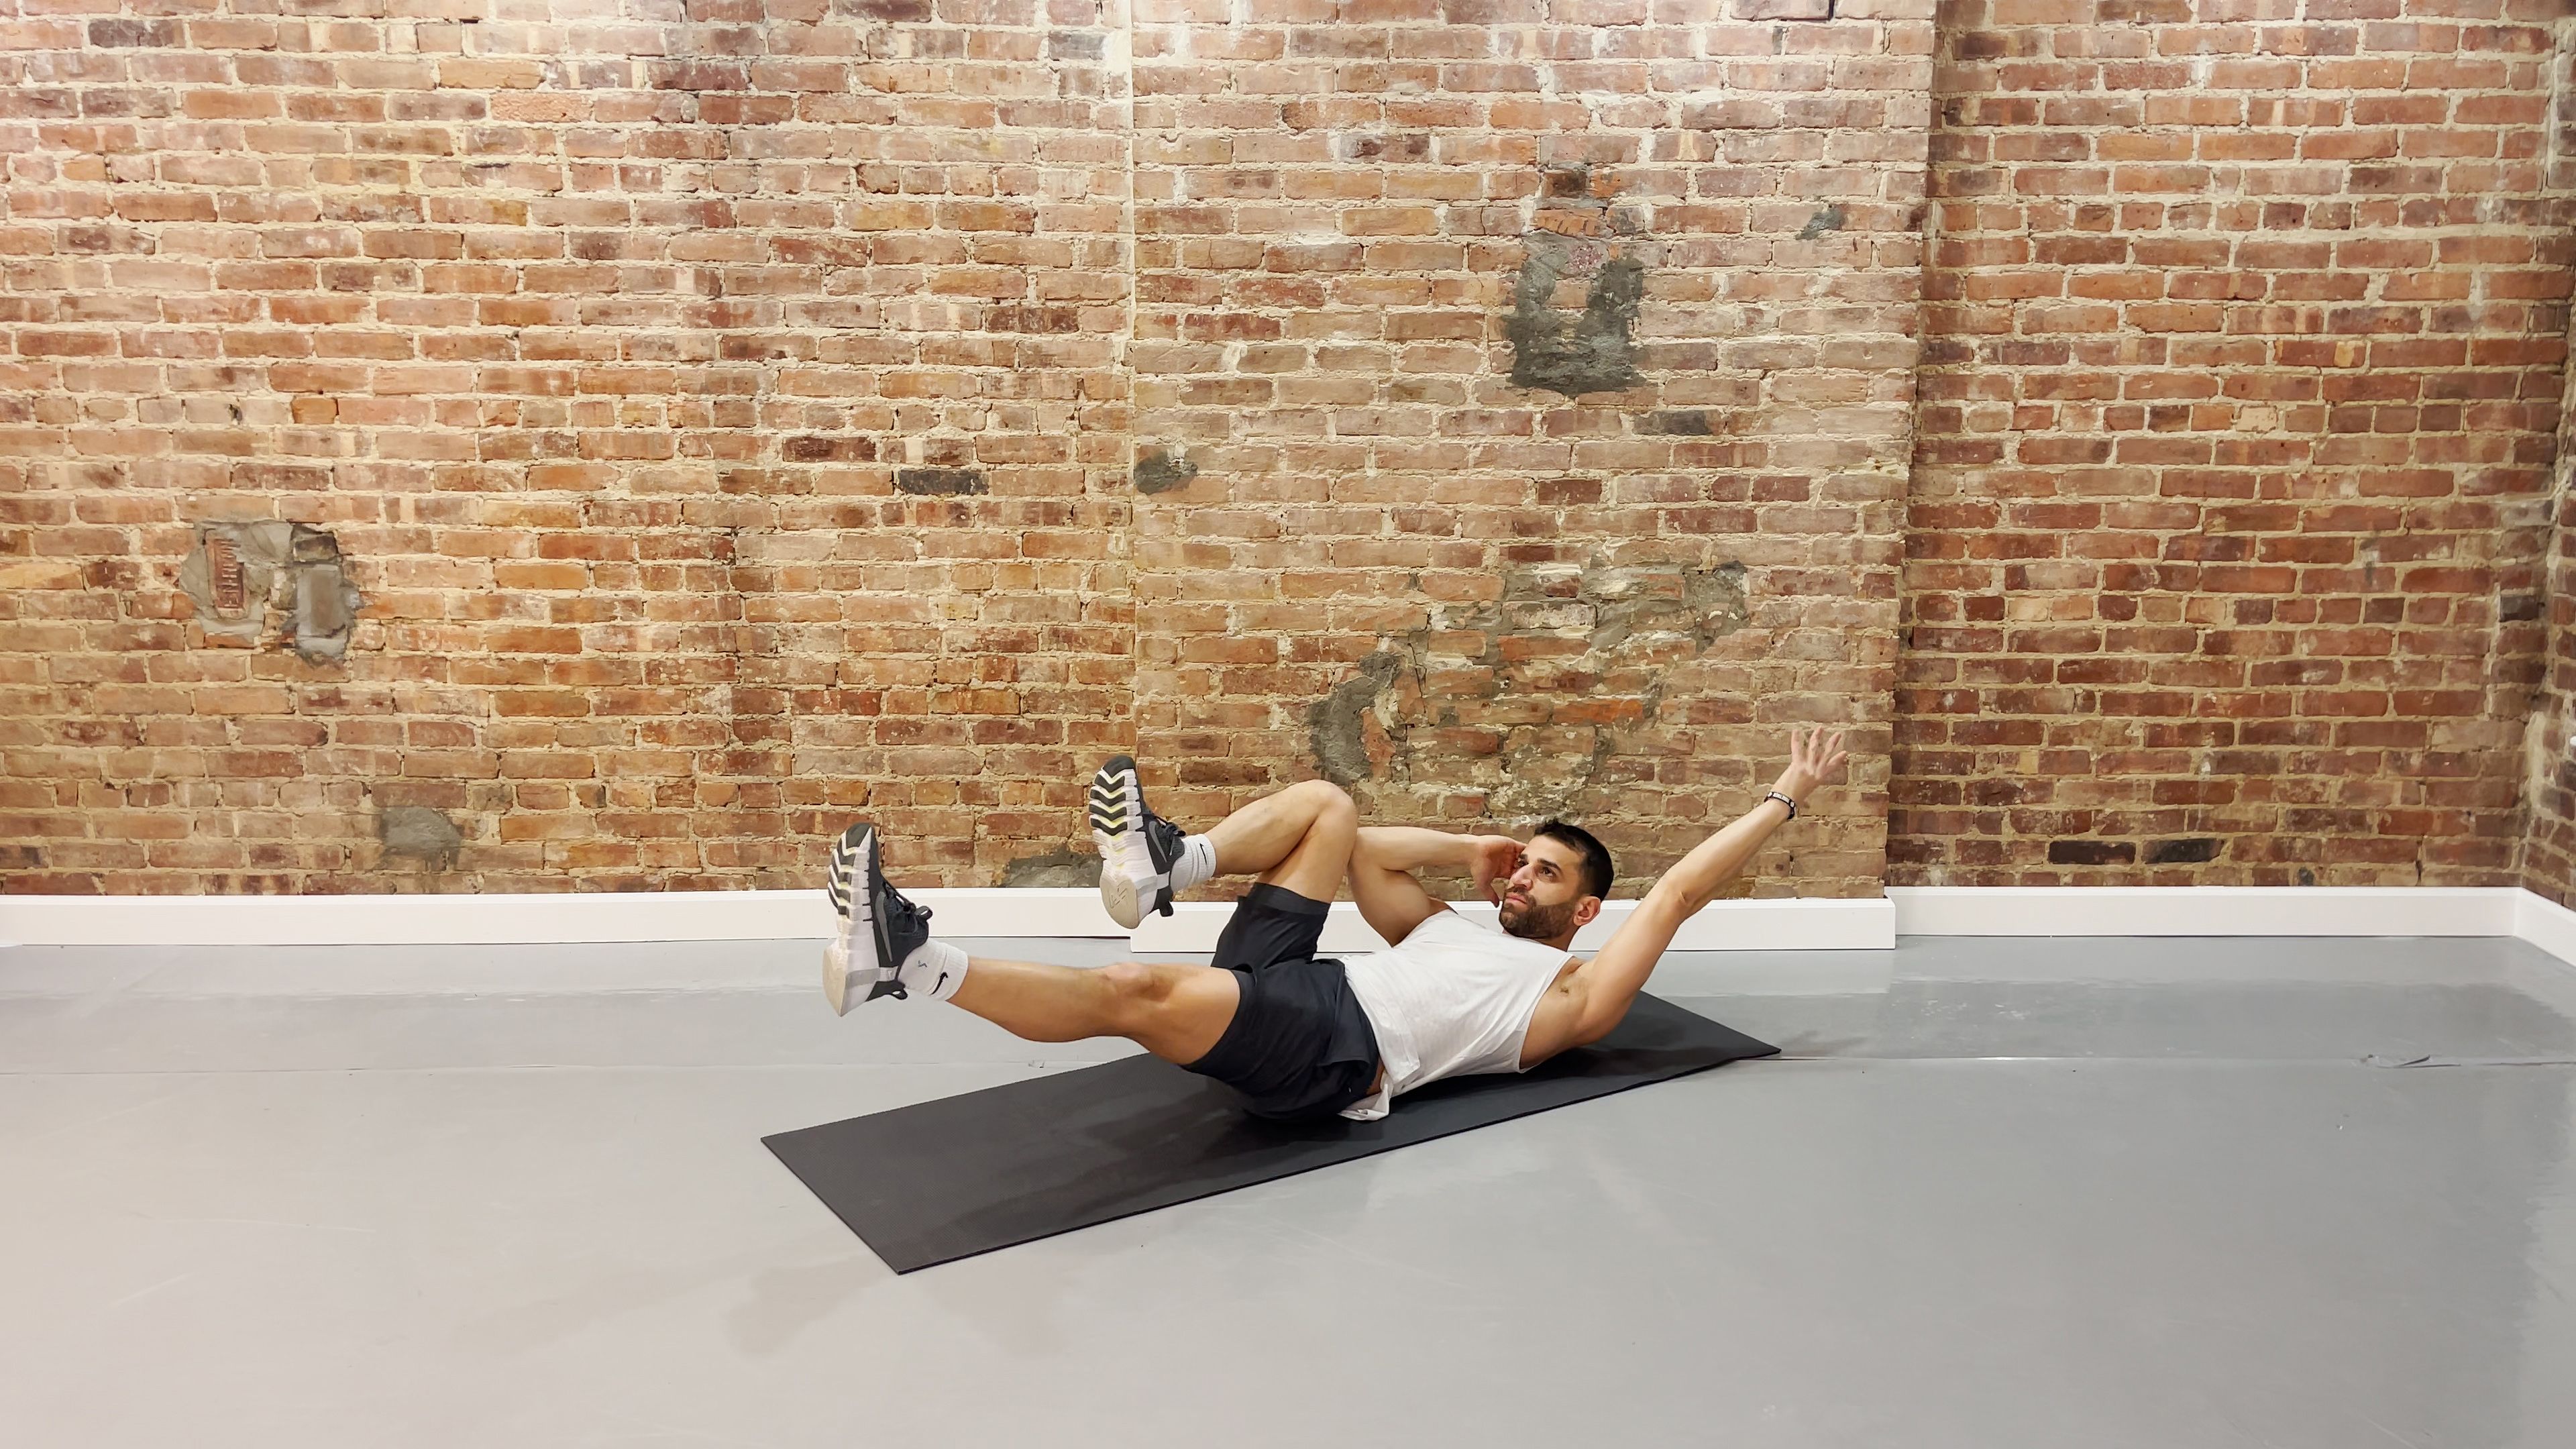 Here are a few exercises from the newest Wall Pilates Workout. My